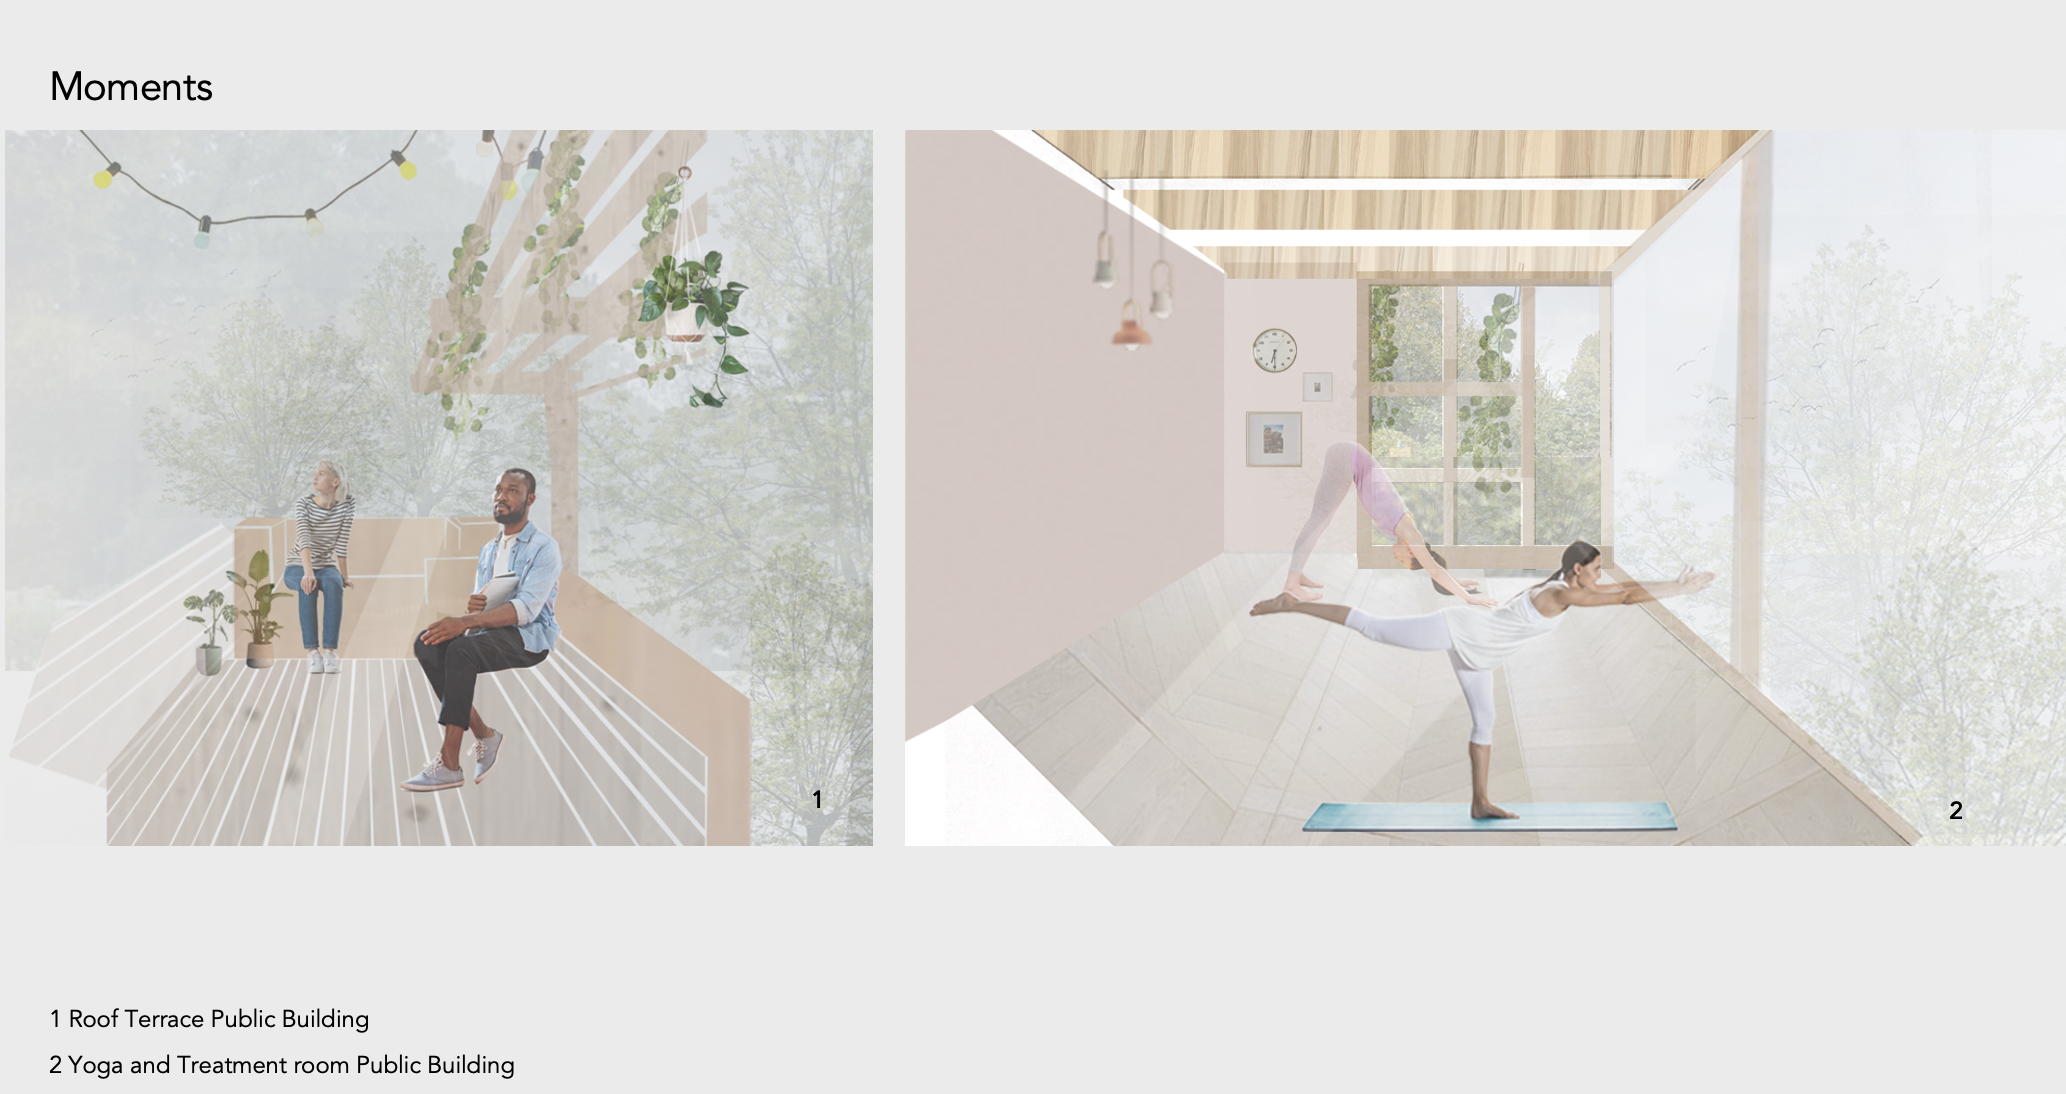 2 images showing the interior of the space. left side: Roof Terrace. Right side: Yoga and Treatment Room